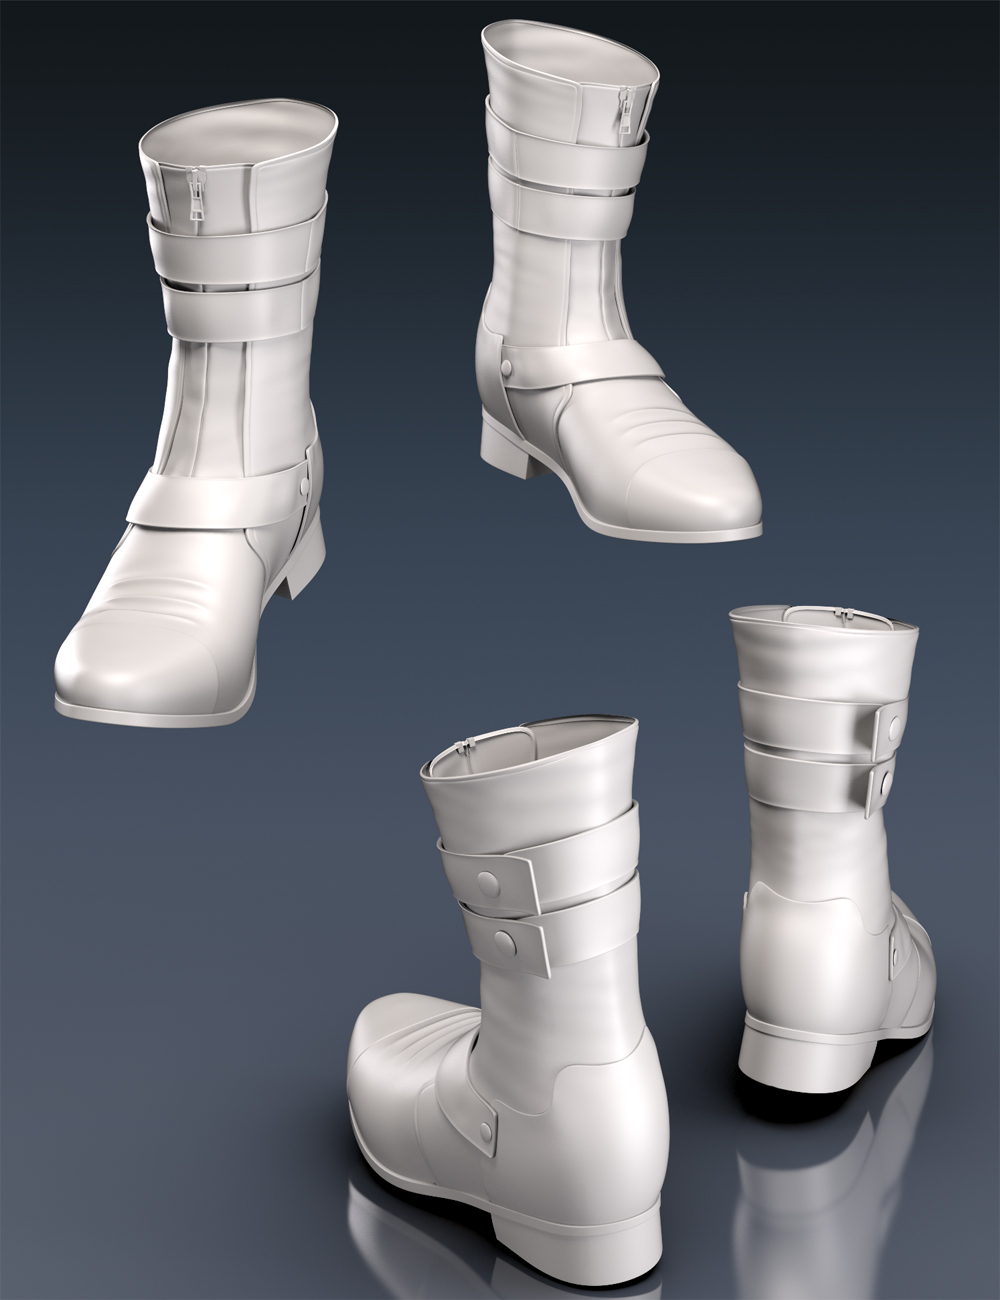 Sabian Boots for Genesis 8 and 8.1 Males | Daz 3D